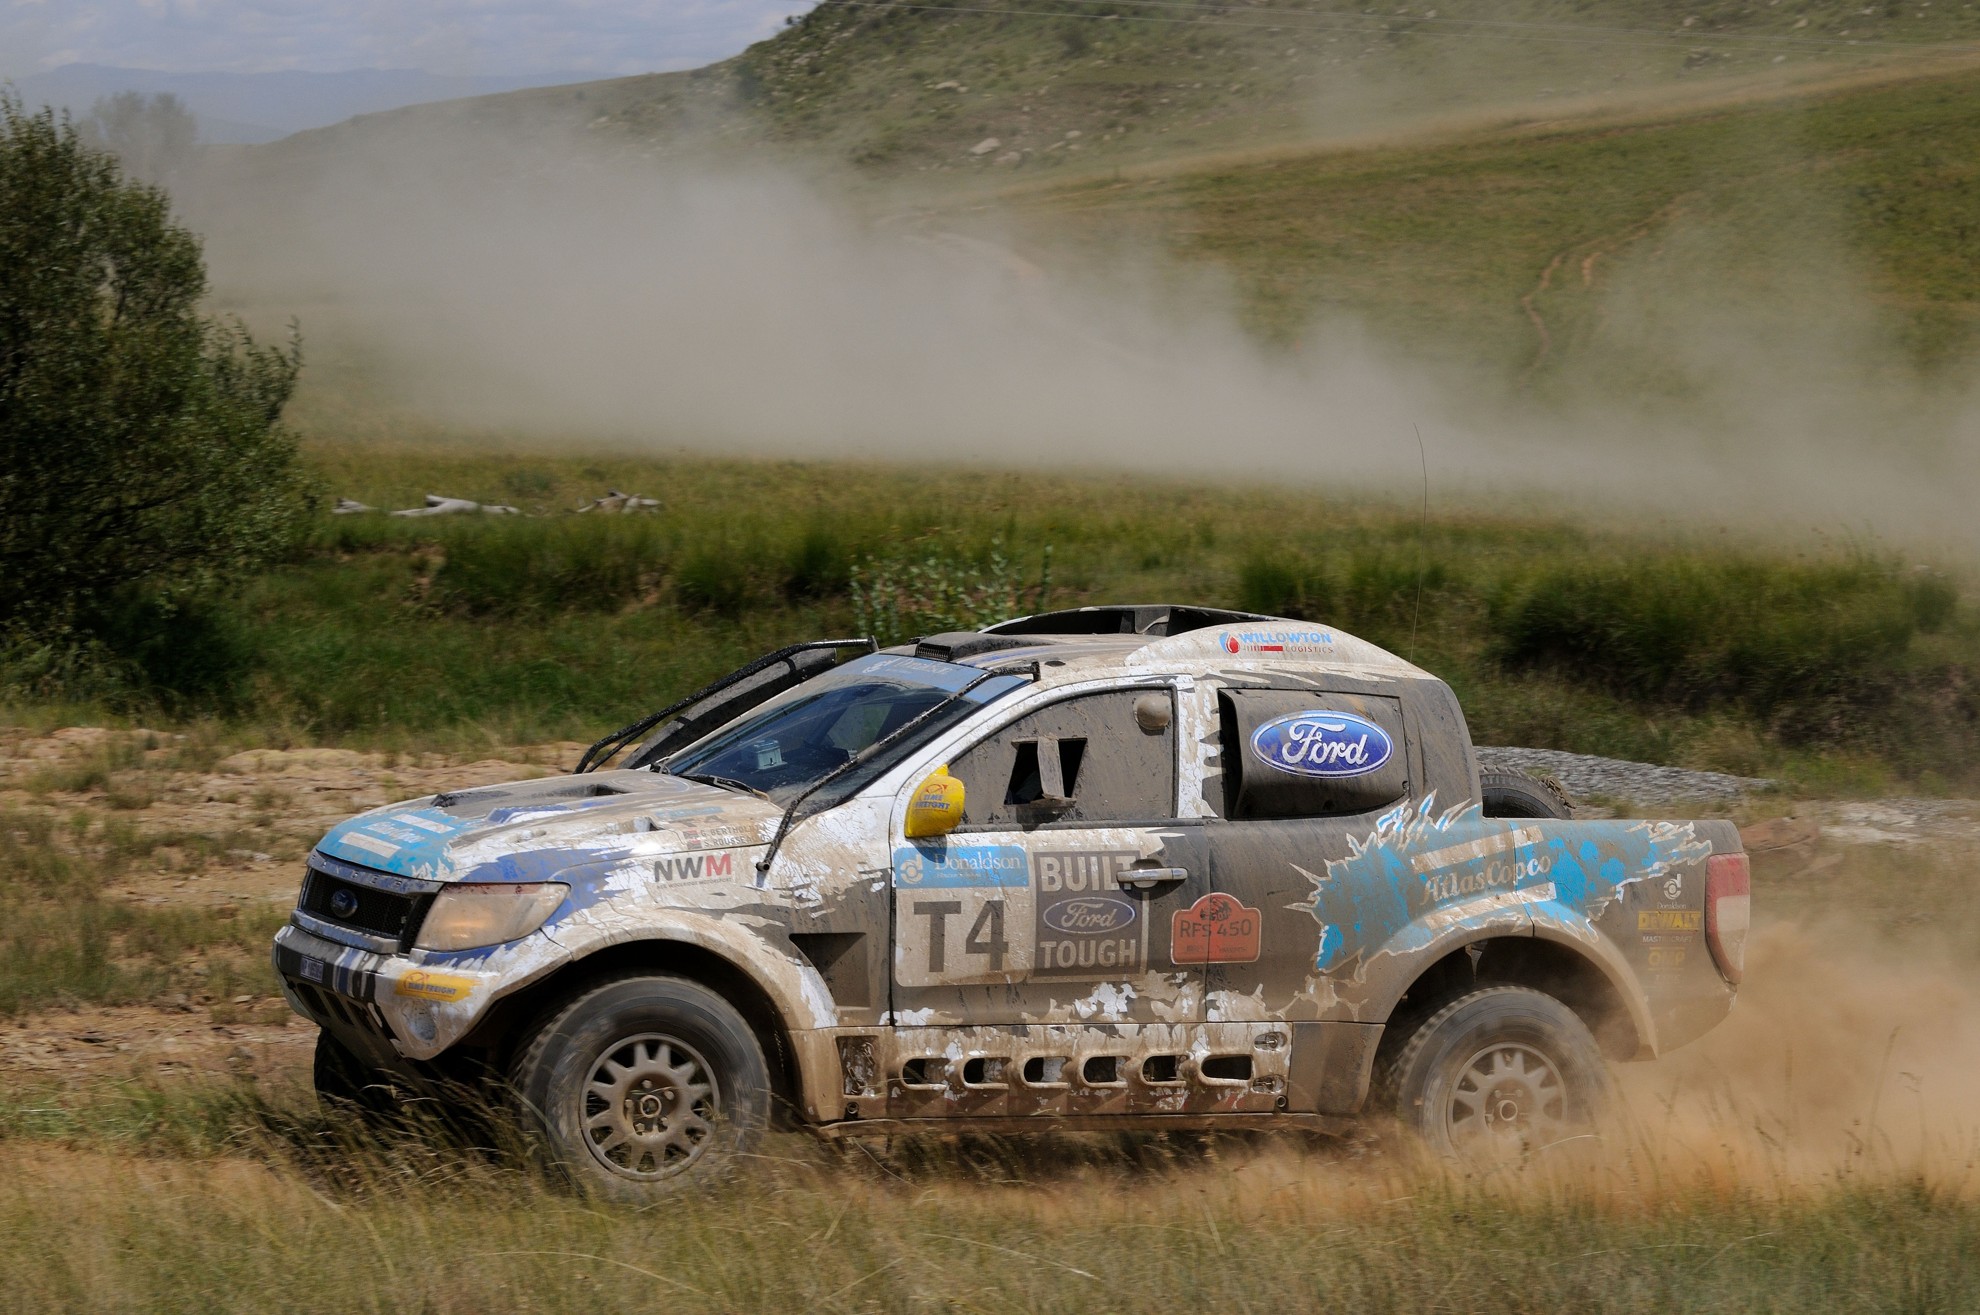 Atlas Copco Ford Racing South Africa Cross Country Championship